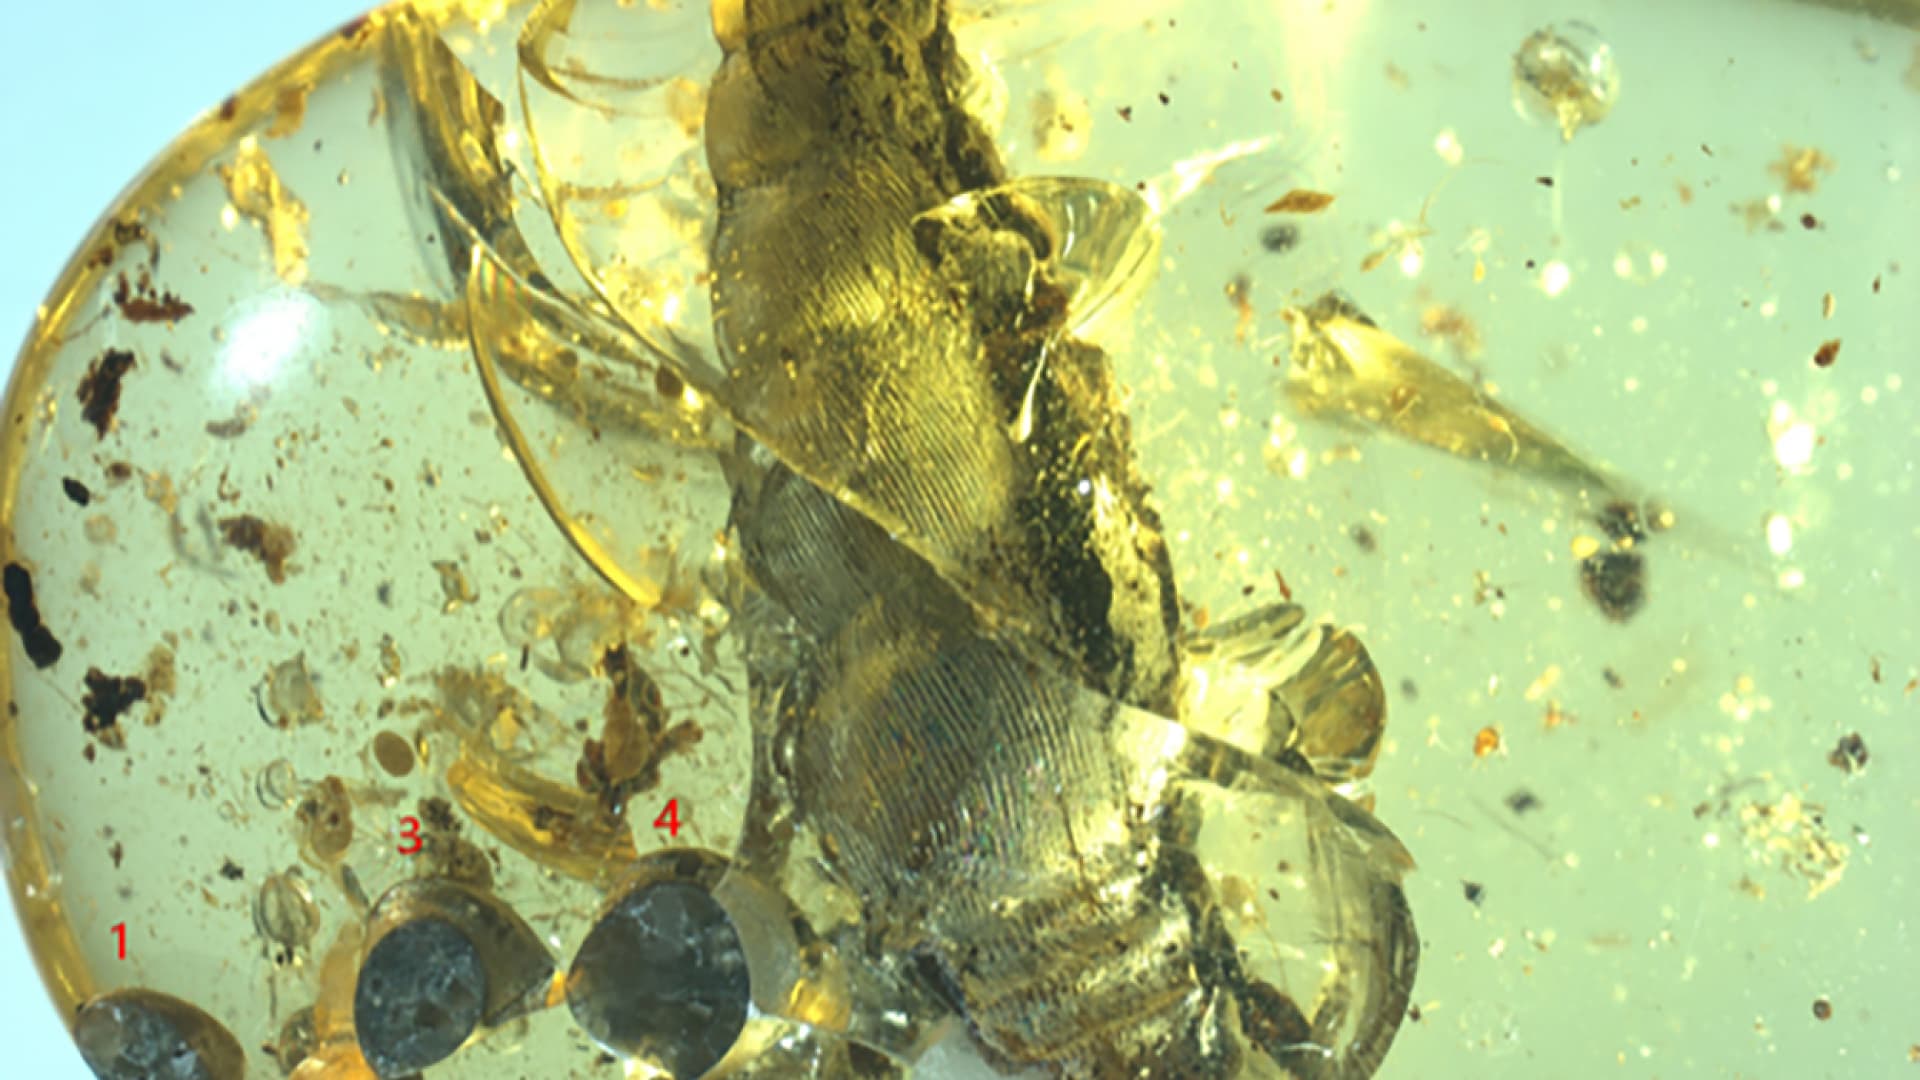 Cretaceous period: mother and infant snails preserved in amber